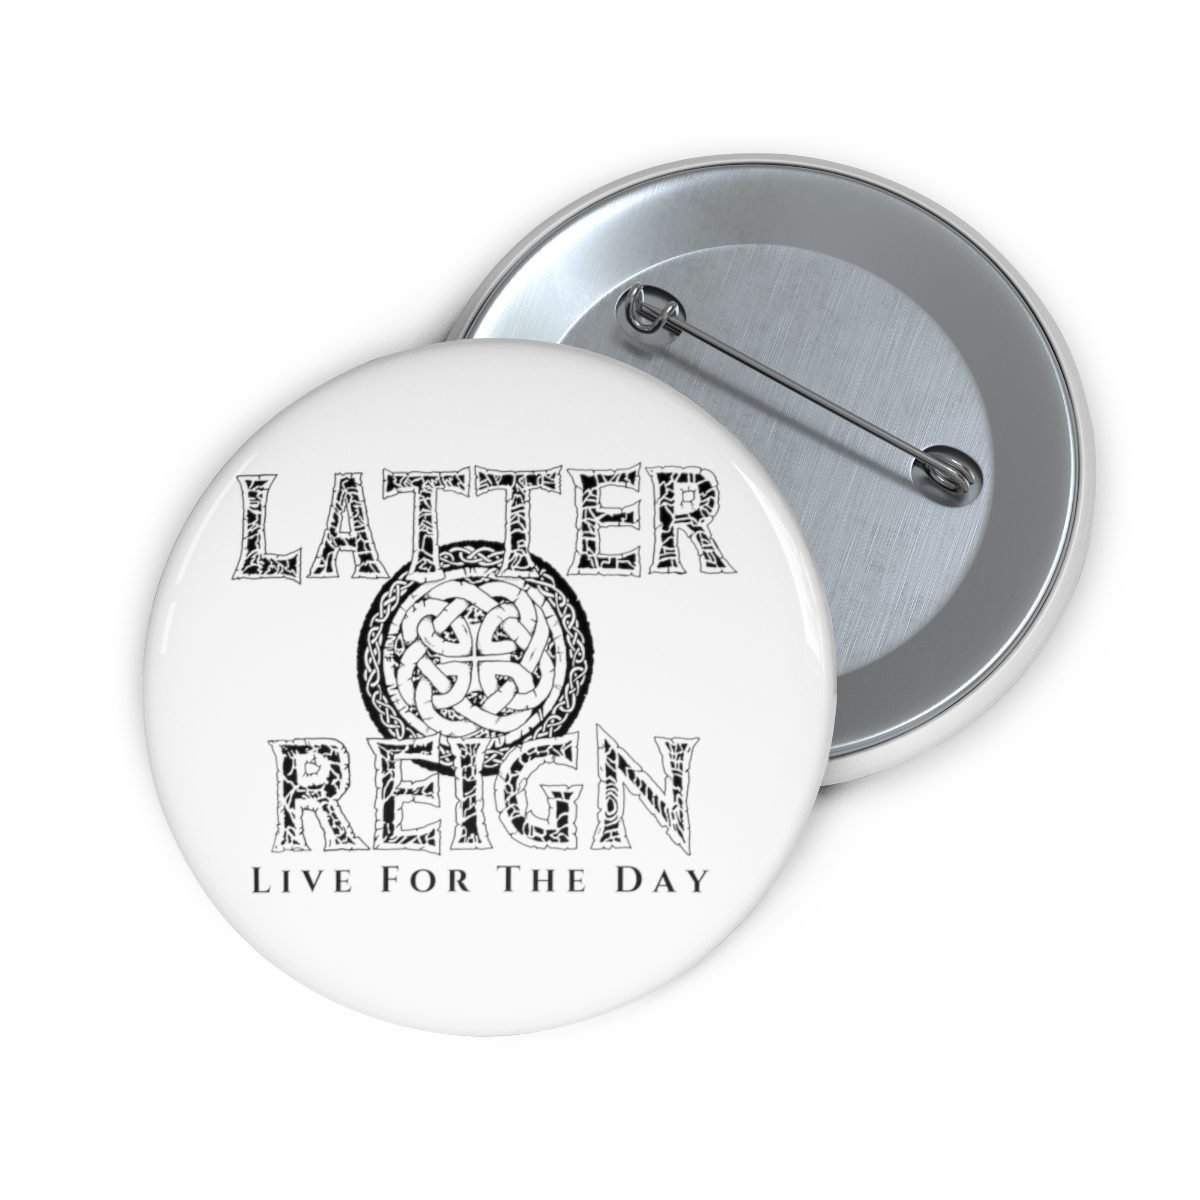 Latter Reign – Live For The Day Logos White Pin Buttons